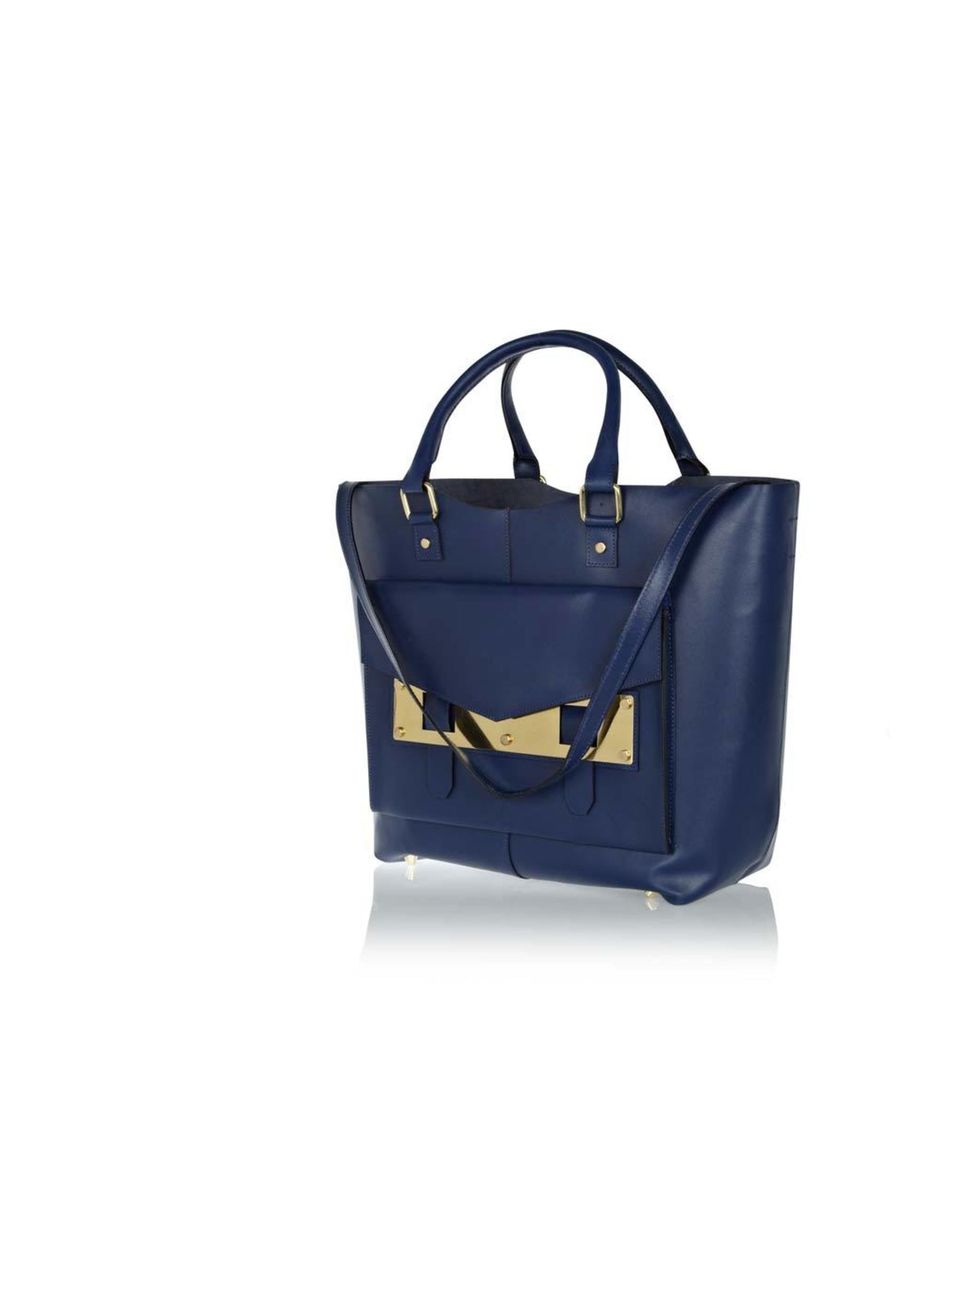 <p>River Island is my go-to for statement pieces that channel the key new season trends.</p><p>- Sarah Bonser, Fashion Assistant</p><p><a href="http://www.riverisland.com/women/bags--purses/shopper--tote-bags/Blue-leather-metal-plate-tote-bag-638220">Rive